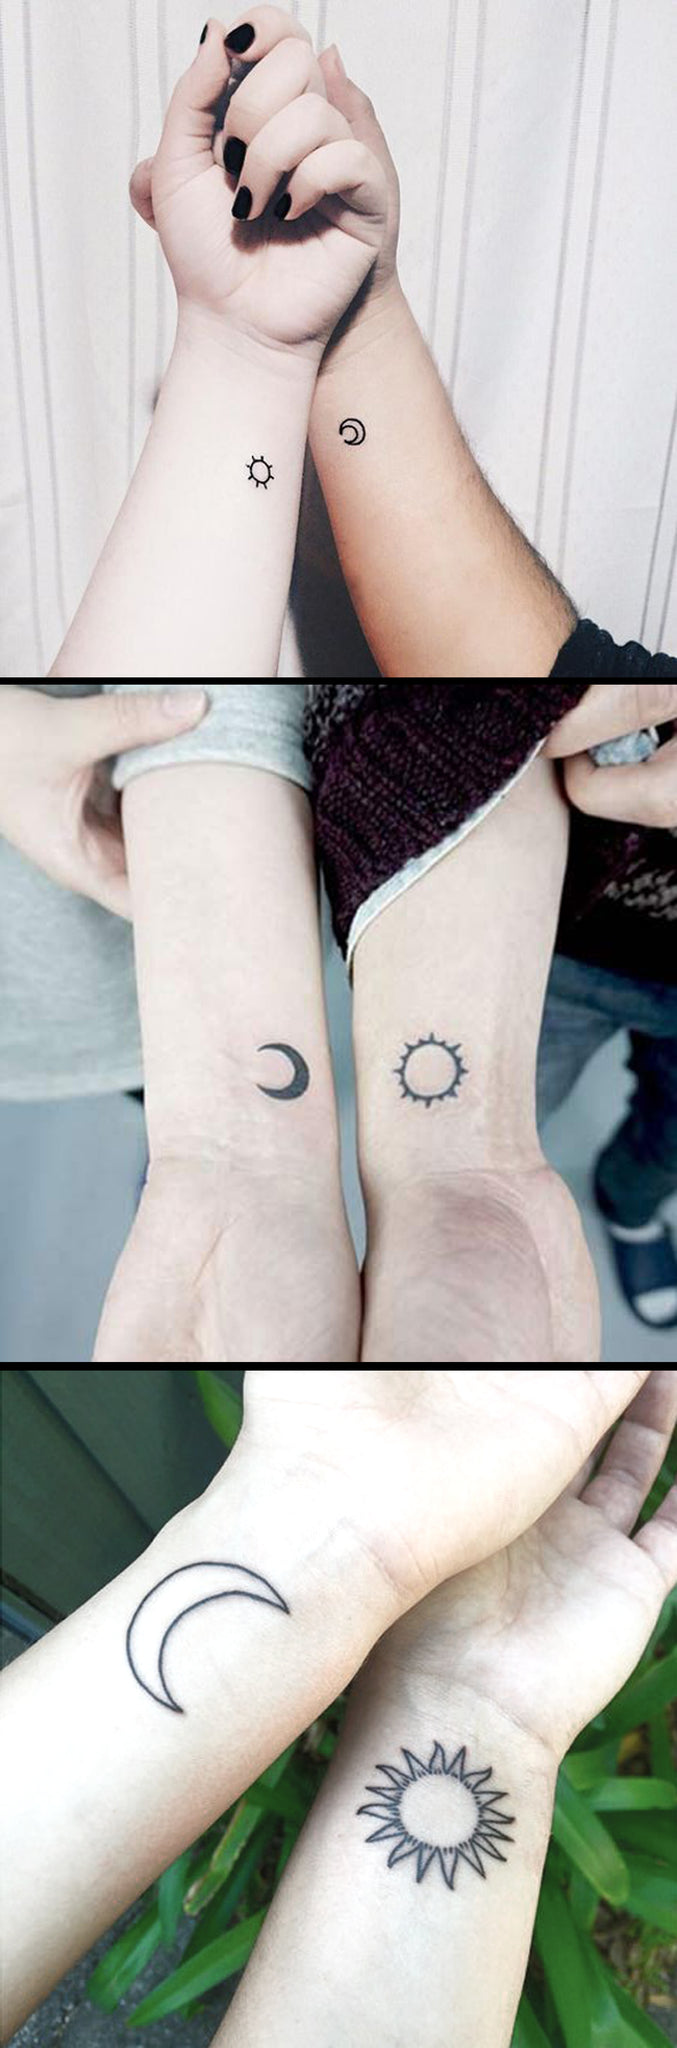 Matching Sun and Moon Tattoo Ideas for Couples, Bestfriends, Sisters, for 2 Siblings - Small Wrist Tatouage - Ideas Del Tatuaje - www.MyBodiArt.com 